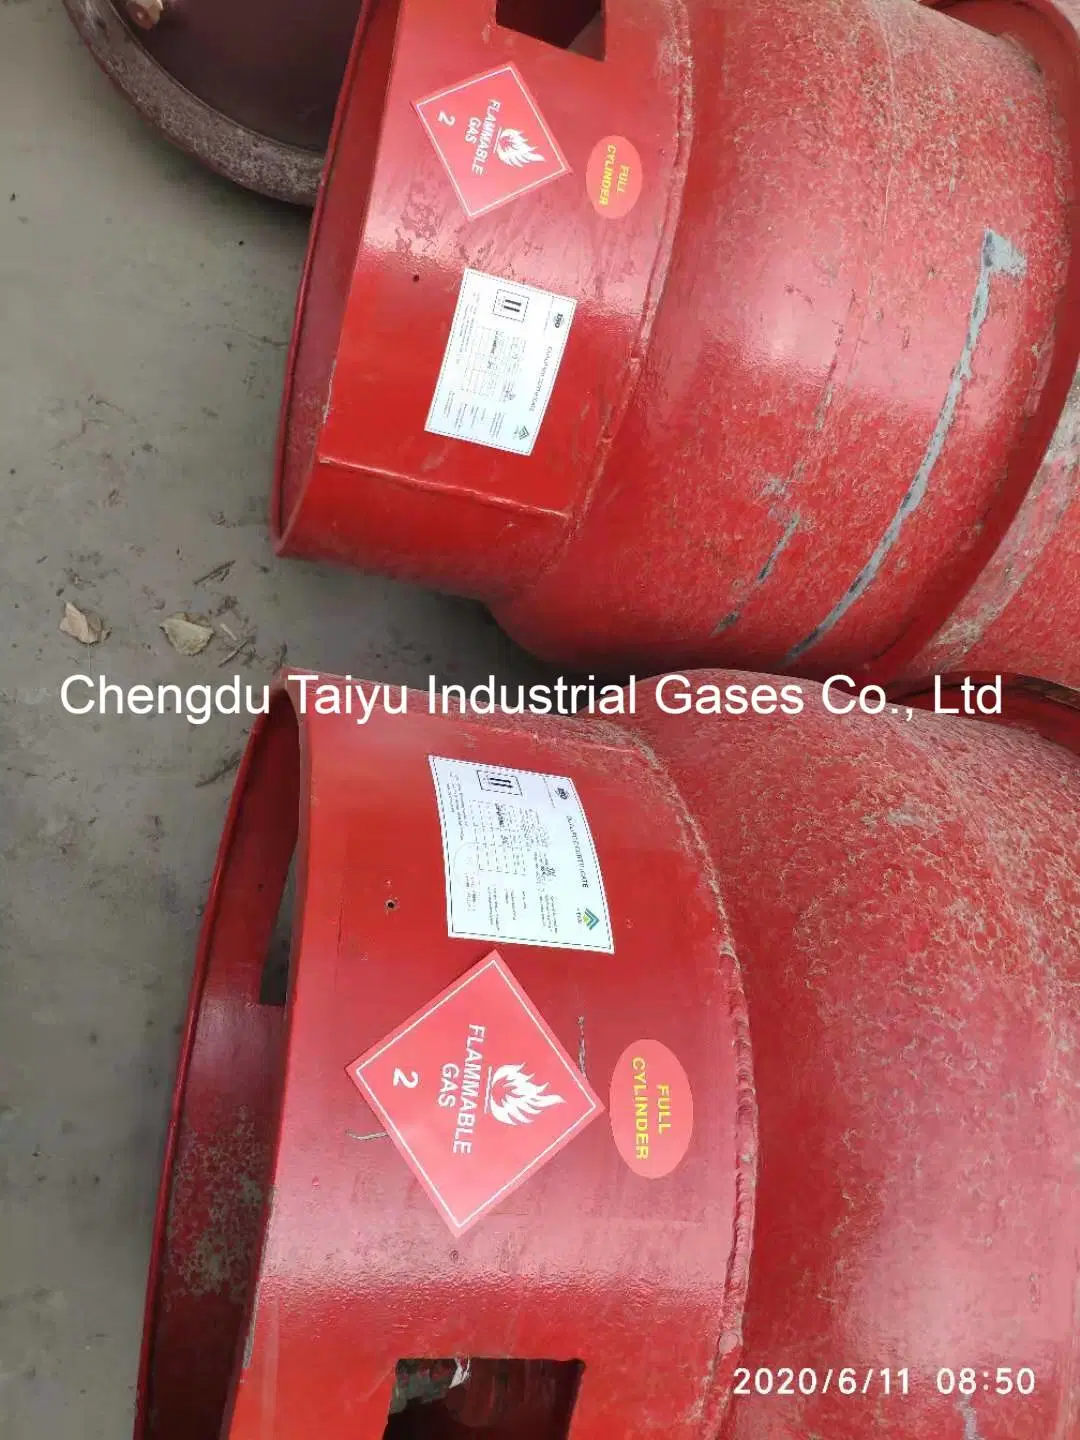 Refrigeration Gas R600A Industrial Grade 99.5% Purity ISO-Butane I-C4h10, 450kg Per 926L Cylinder Loading